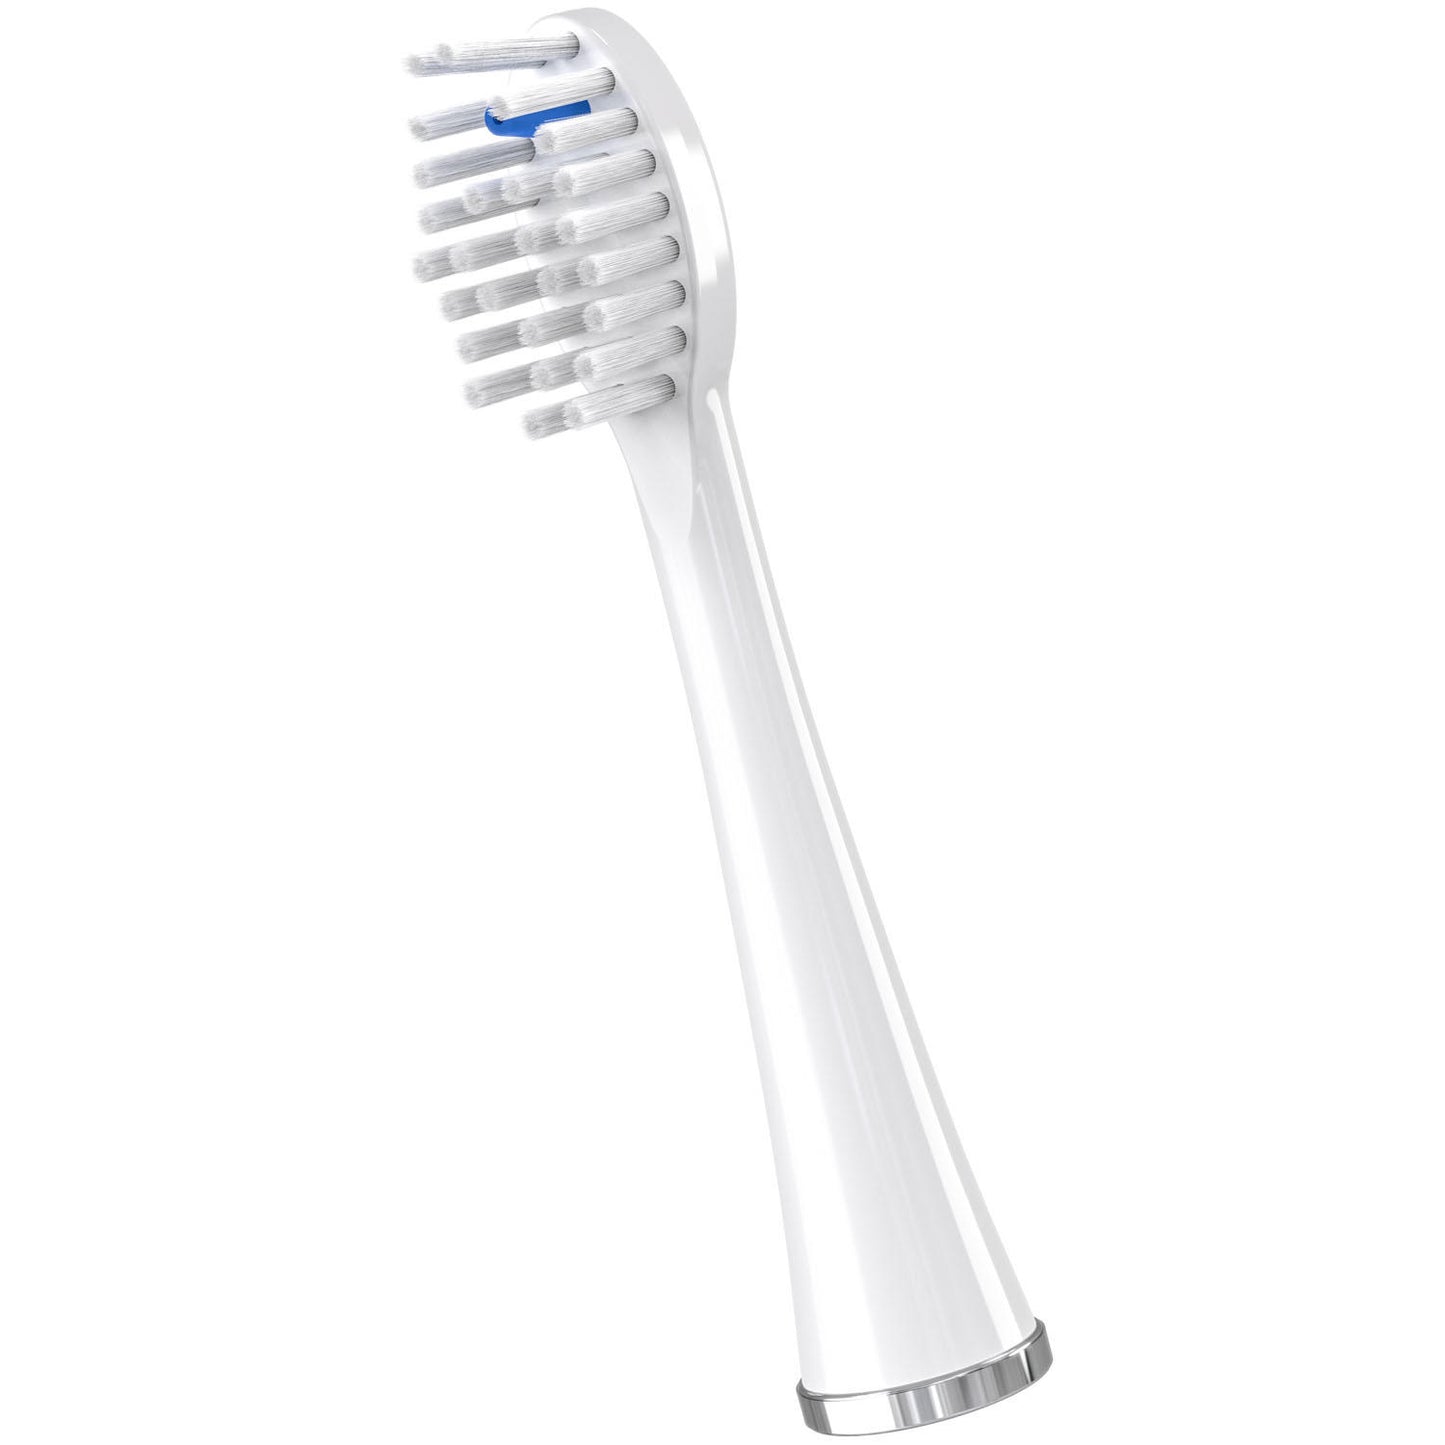 Waterpik Sonic-Fusion Full-Size Replacement Flossing Toothbrush Heads,White (6 pk.)